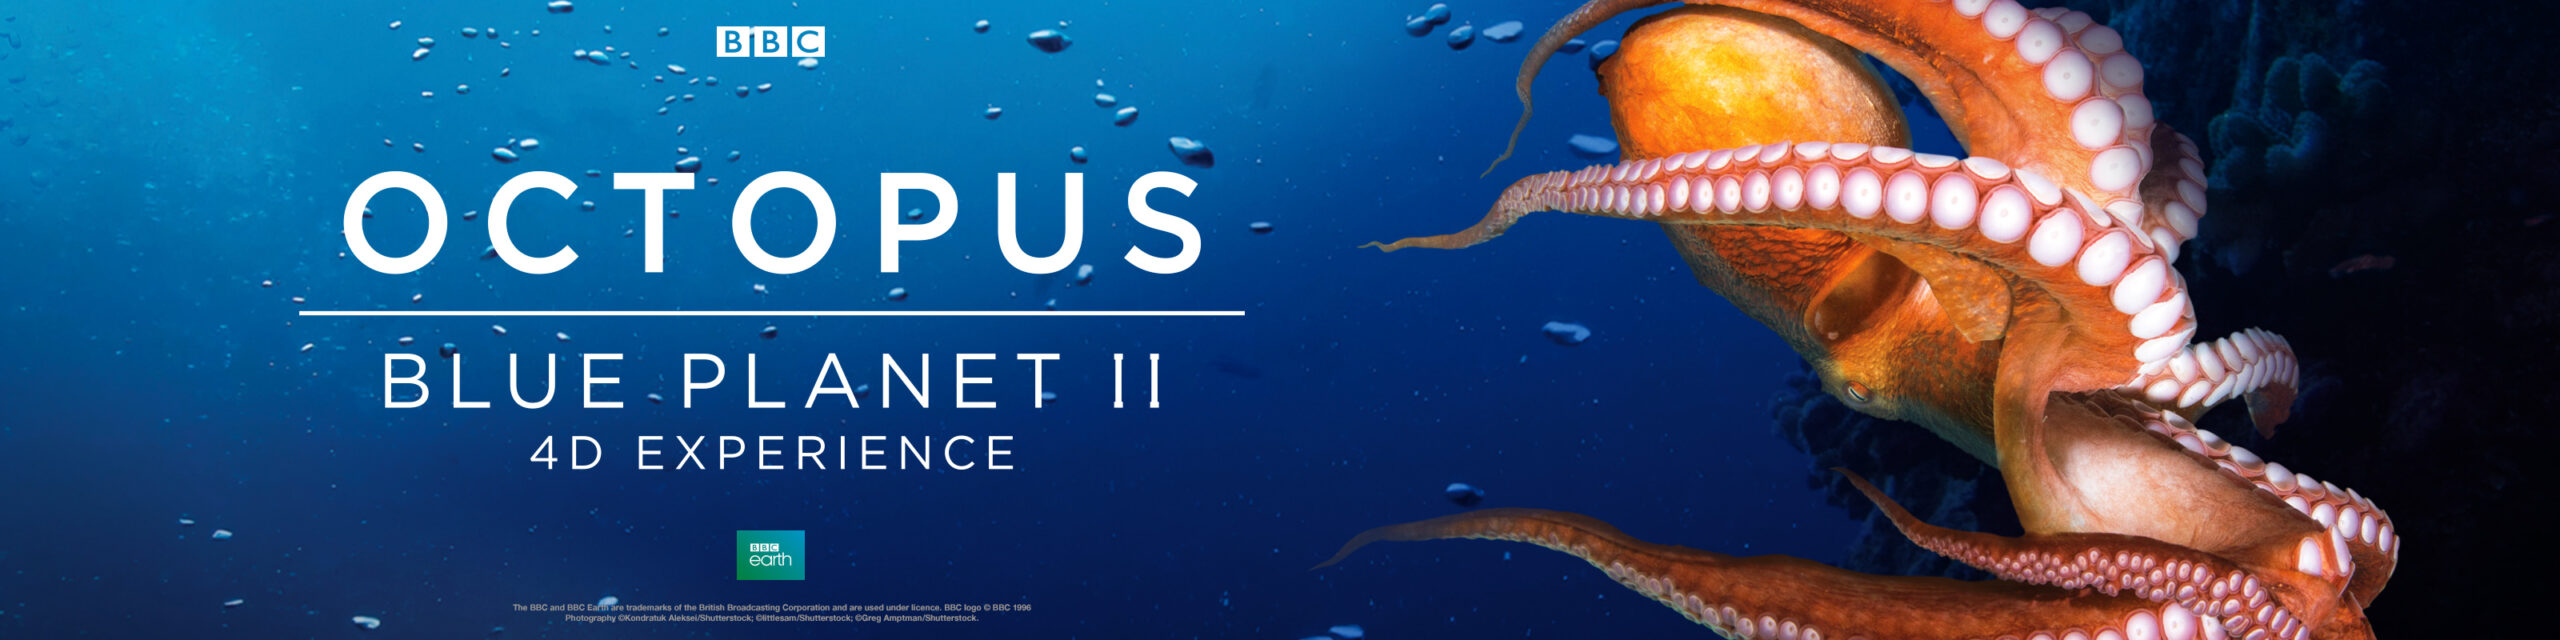 OCTOPUS: BLUE PLANET II 4D EXPERIENCE